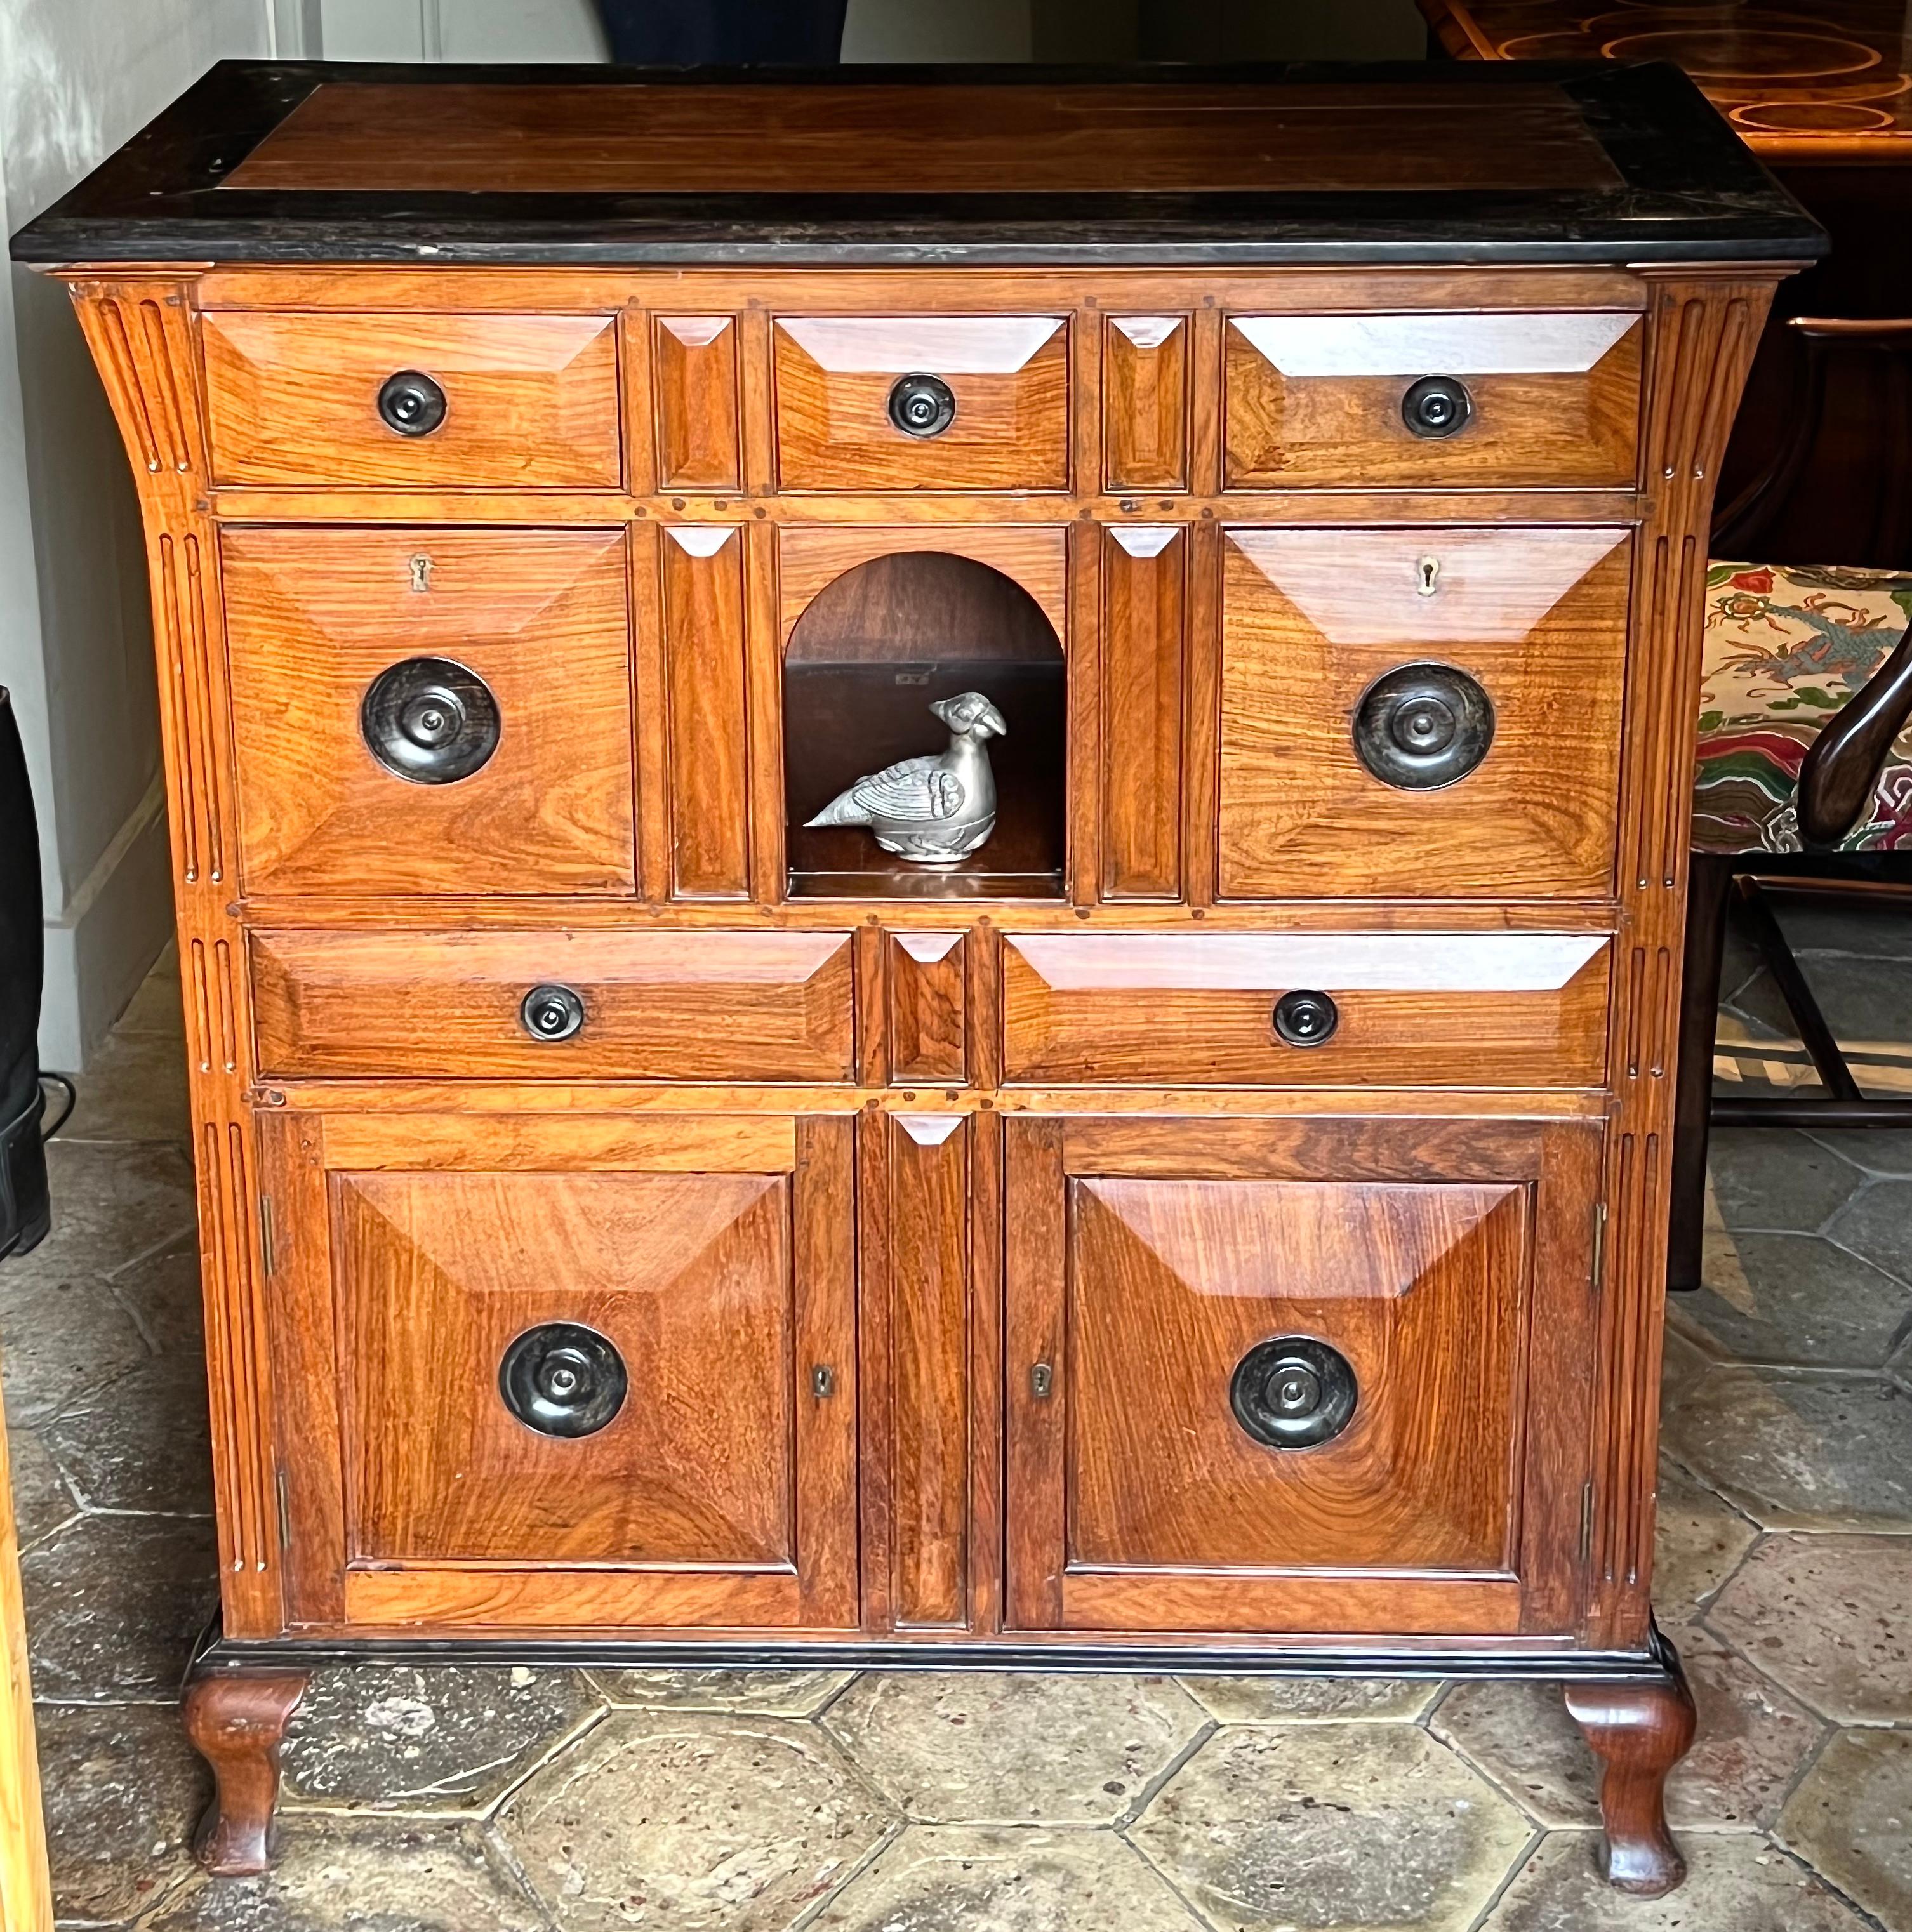 An unusual Colonial early-19th century solid satinwood-faced chest of drawers with cupboards.
Circa 1820.

The carcass is in solid rosewood and ebony. It features a broad ebony crossbanded mitred top.
All of very good rich colour, and in its